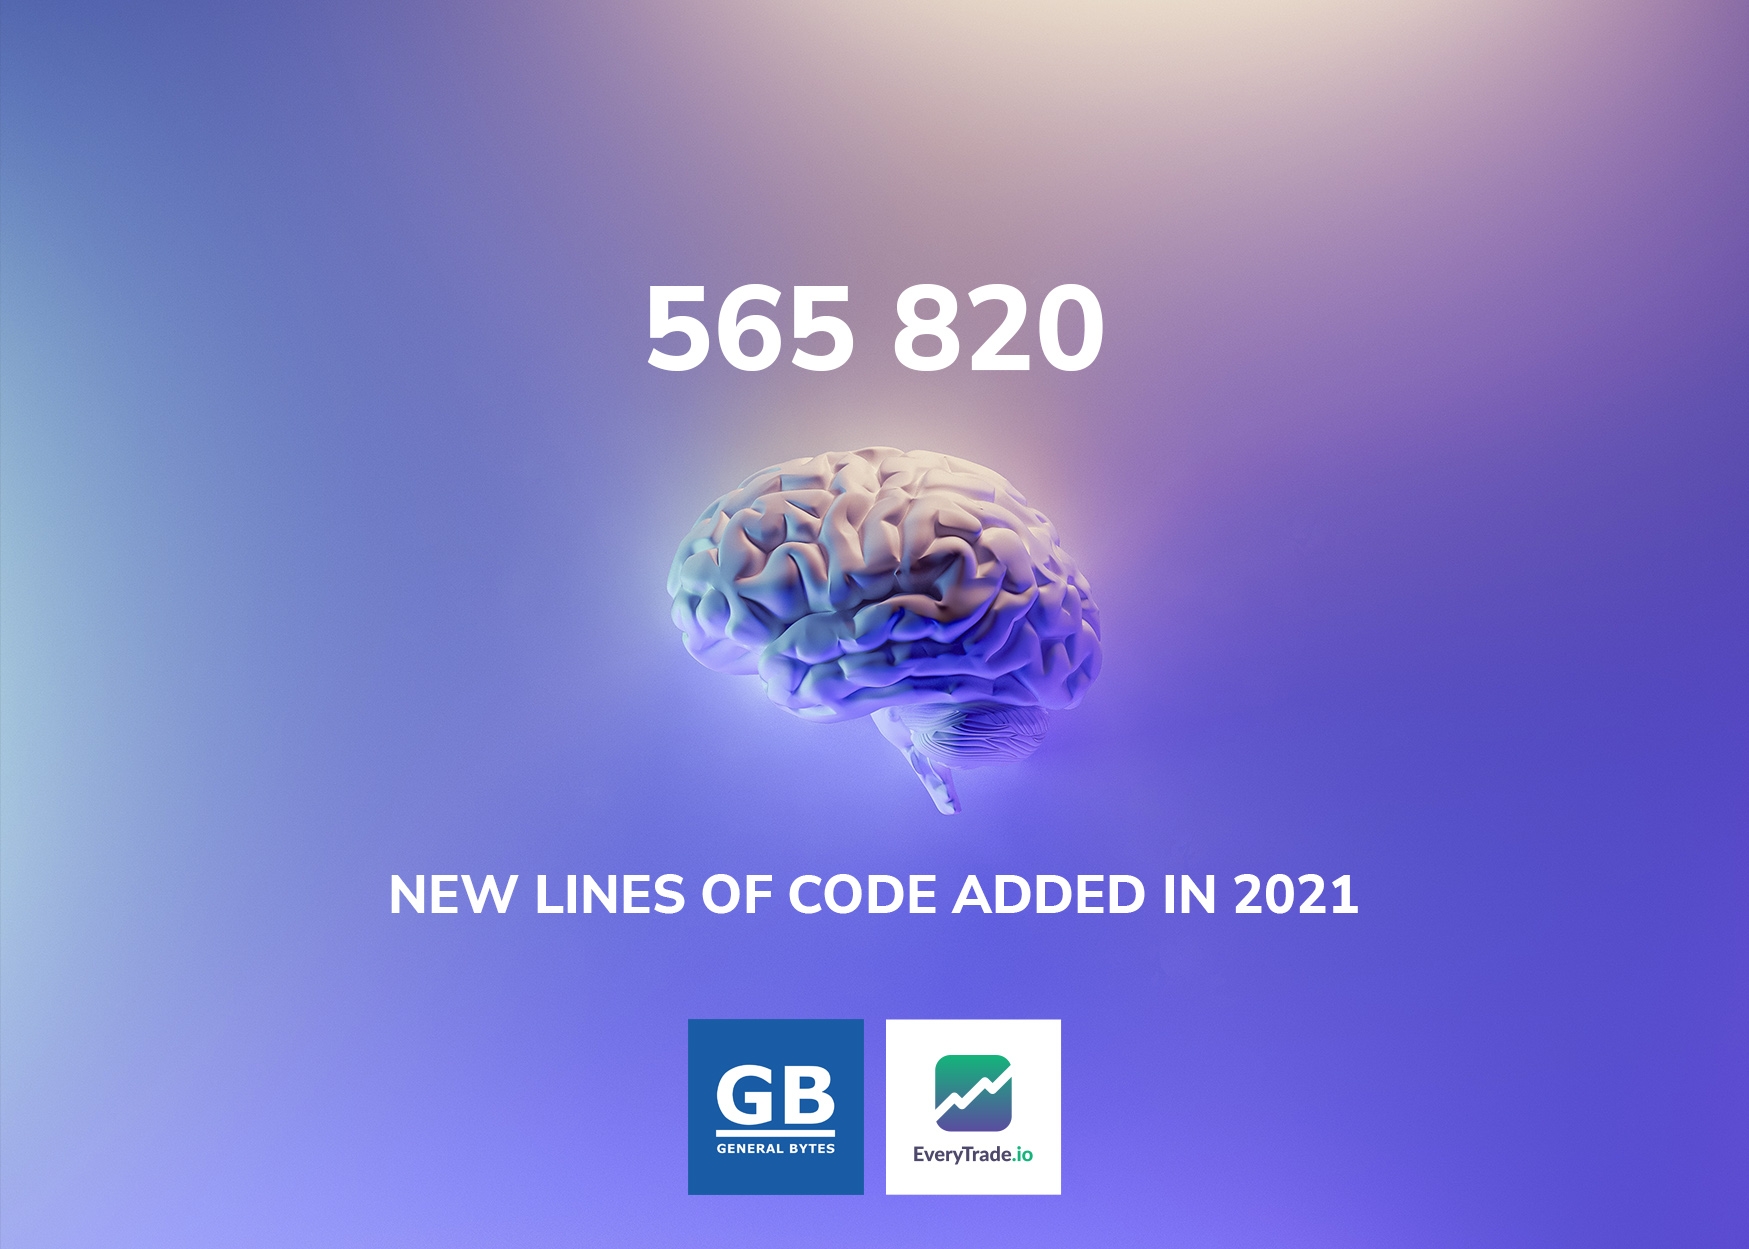 new lines of code added in 2021 by GENERAL BYTES and every trade.io